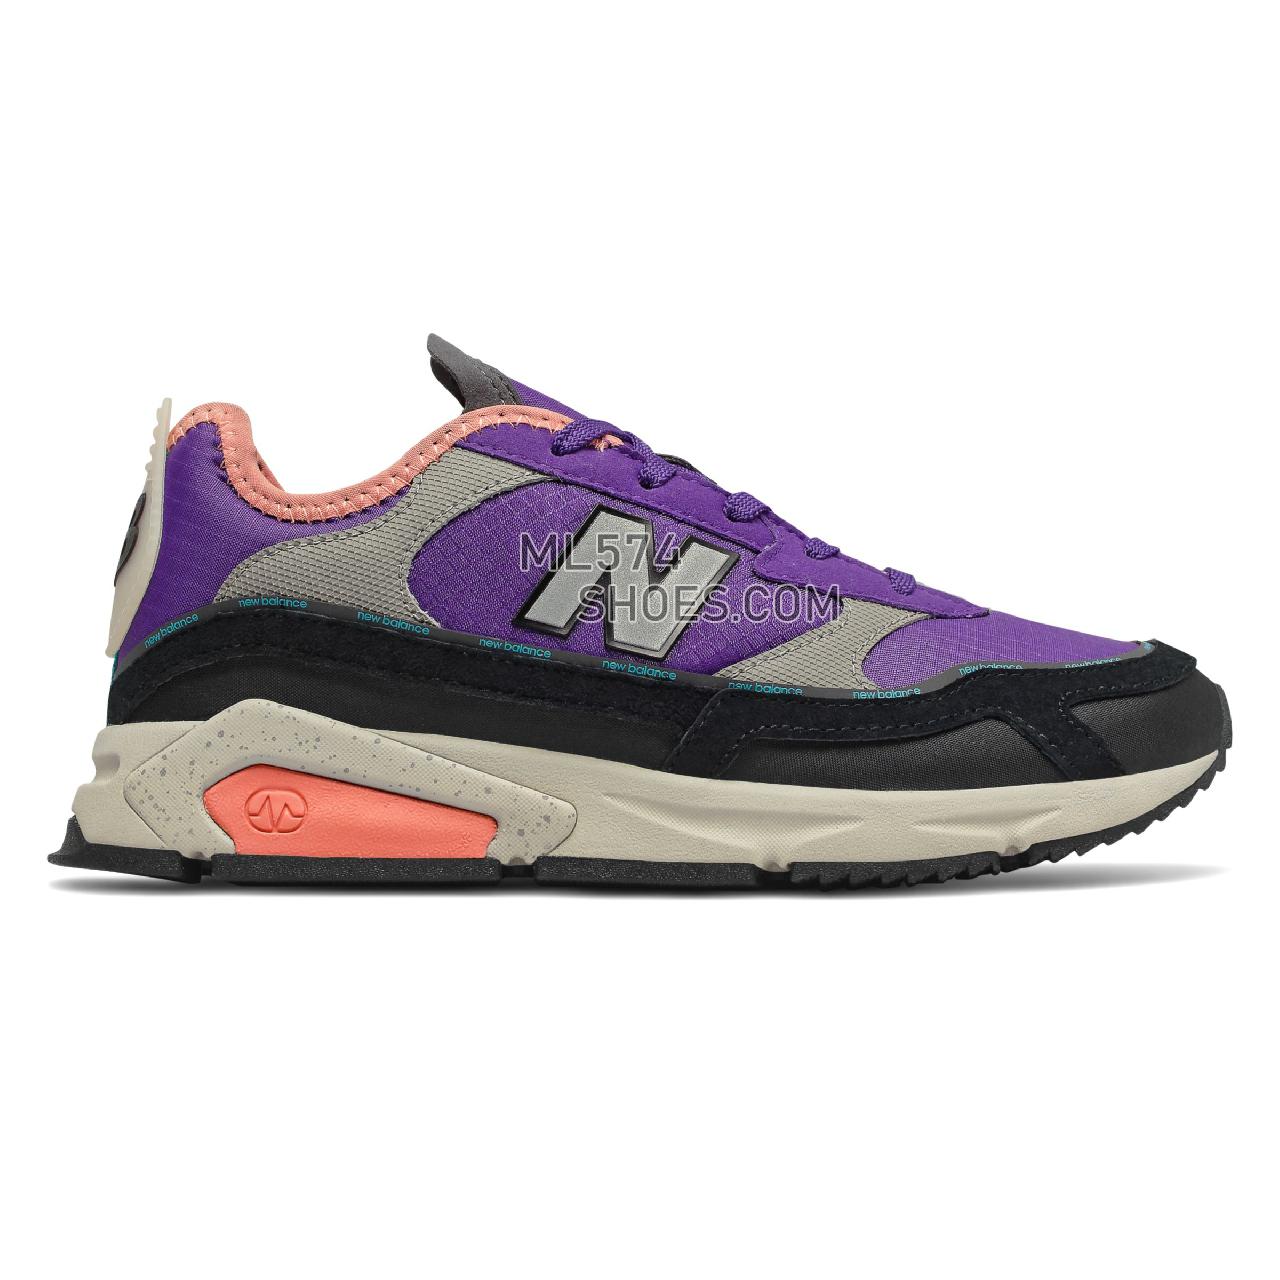 New Balance X-Racer - Women's Sport Style Sneakers - Prism Purple with Natural Peach - WSXRCRQ